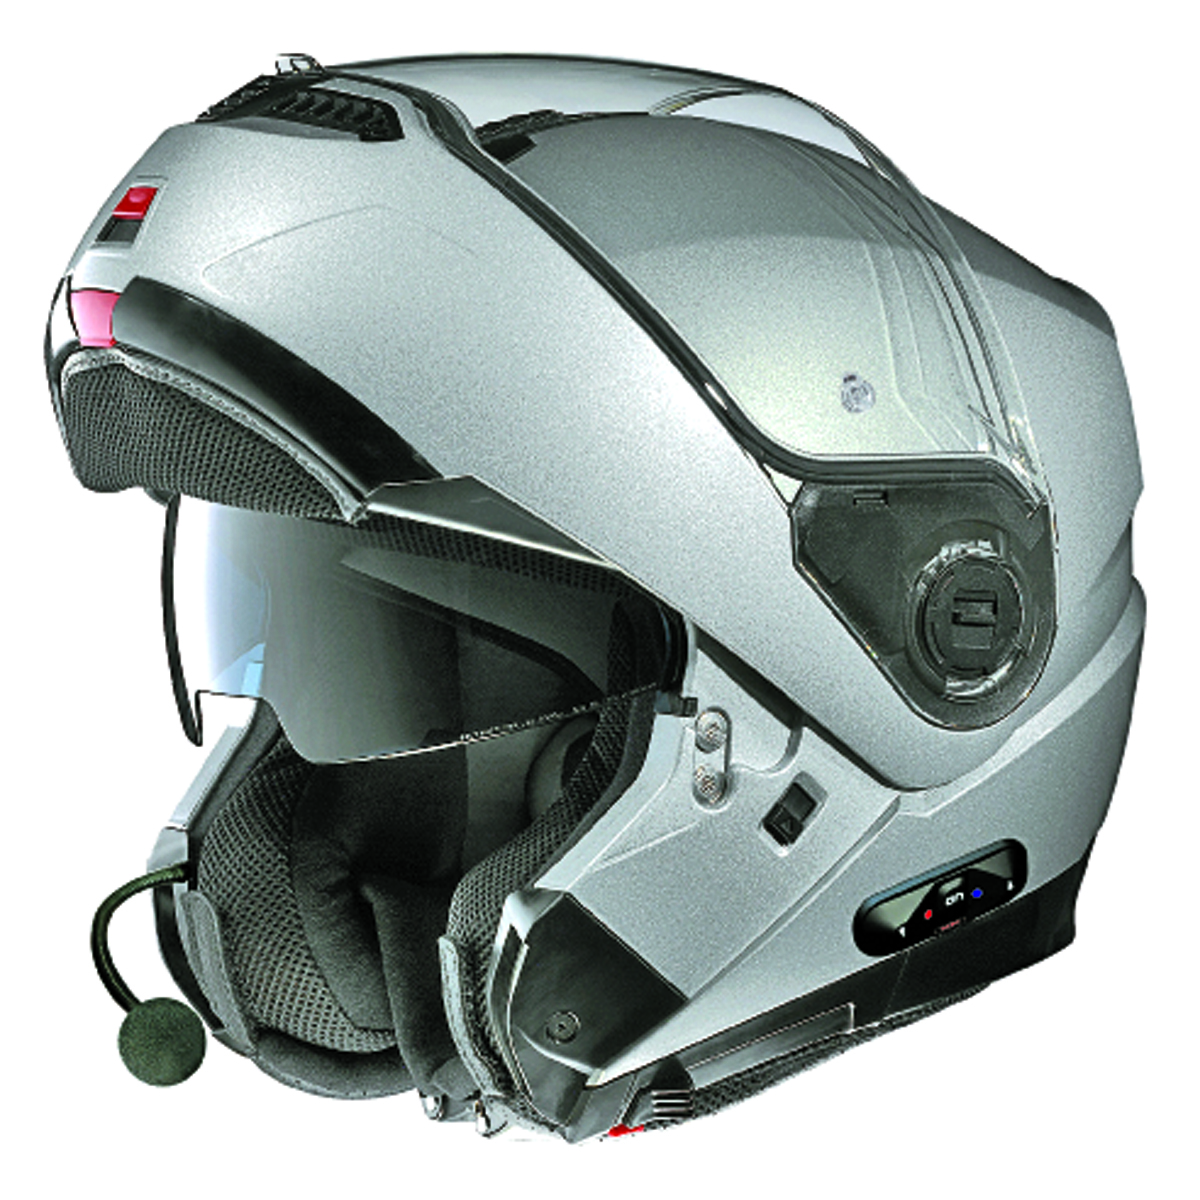 Download this Nolan Modular Motorcycle Helmet Review picture